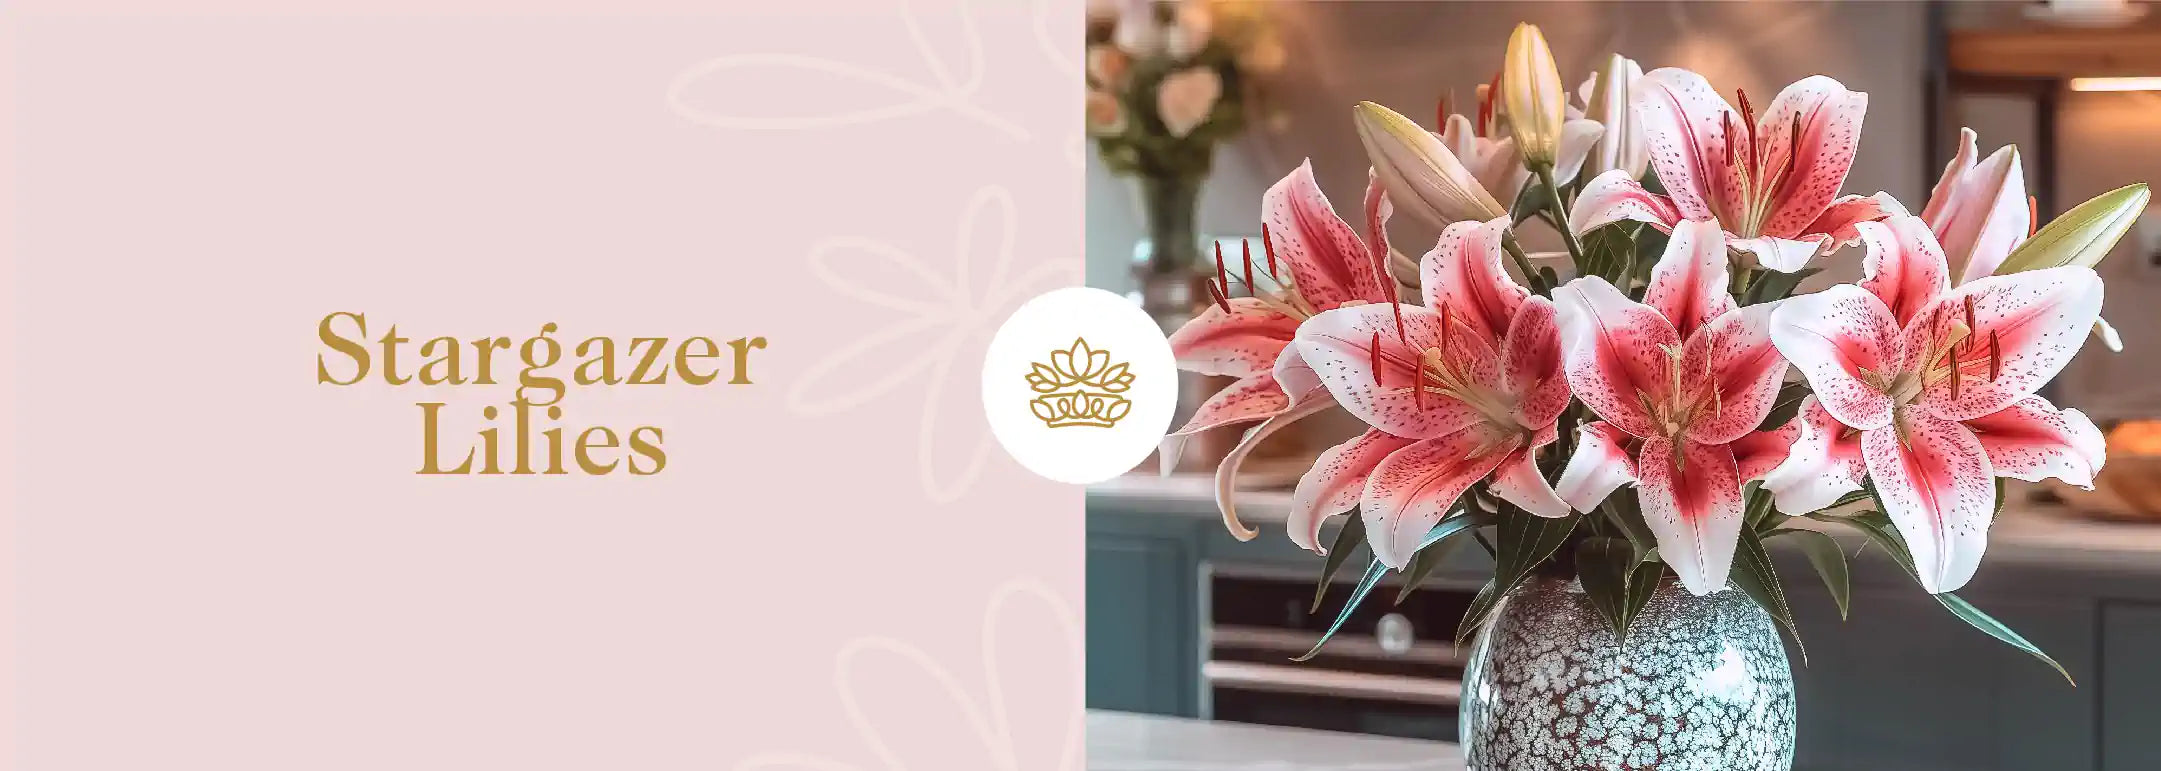 A stunning bouquet of Stargazer Lilies in a decorative vase on a kitchen counter. Fabulous Flowers and Gifts - Stargazer Lilies